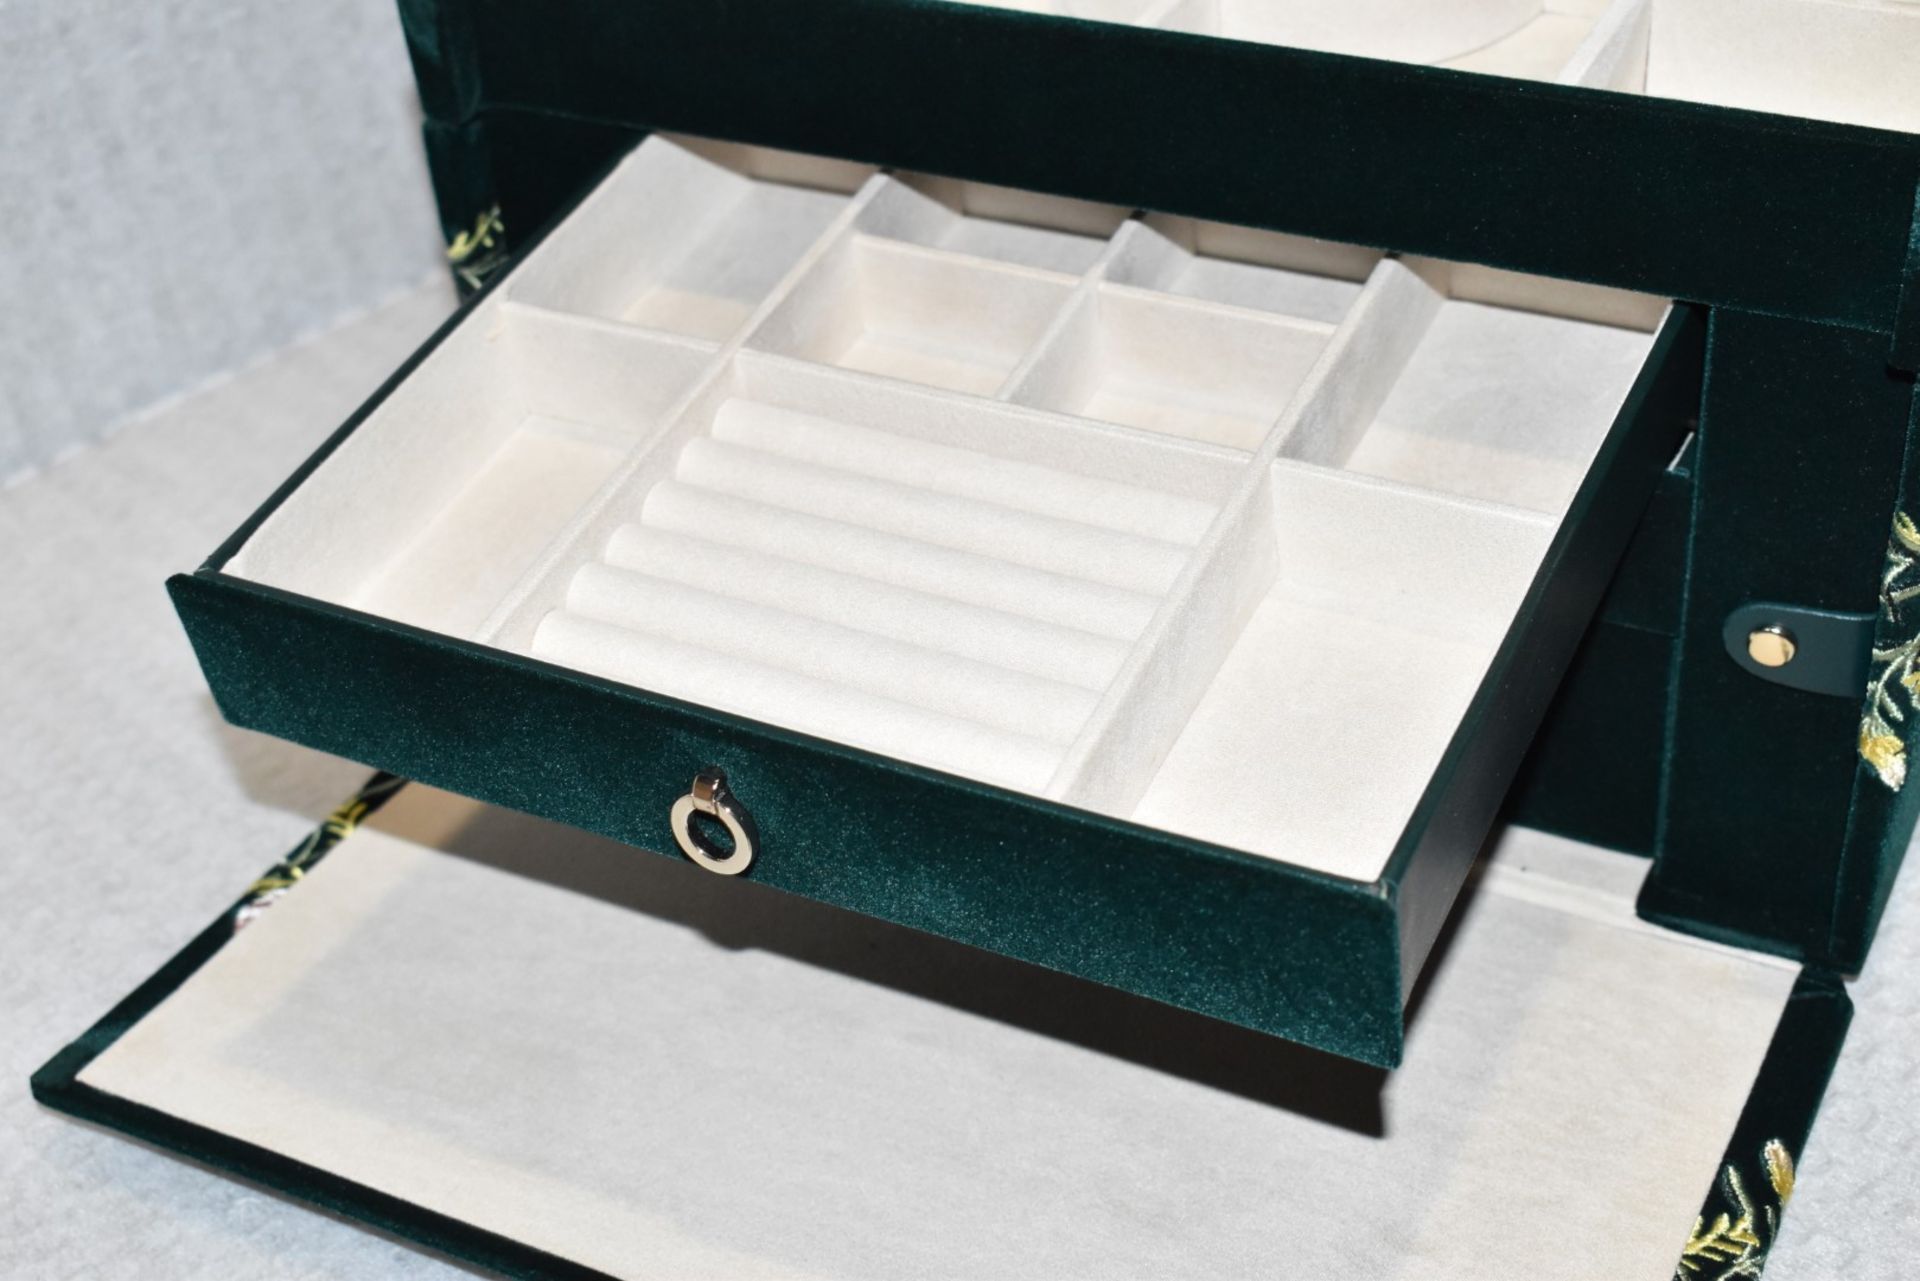 1 x WOLF 'Zoe' Large Luxury Embroidered Jewellery Box, Upholstered in Green Velvet - RRP £739.00 - Image 7 of 10